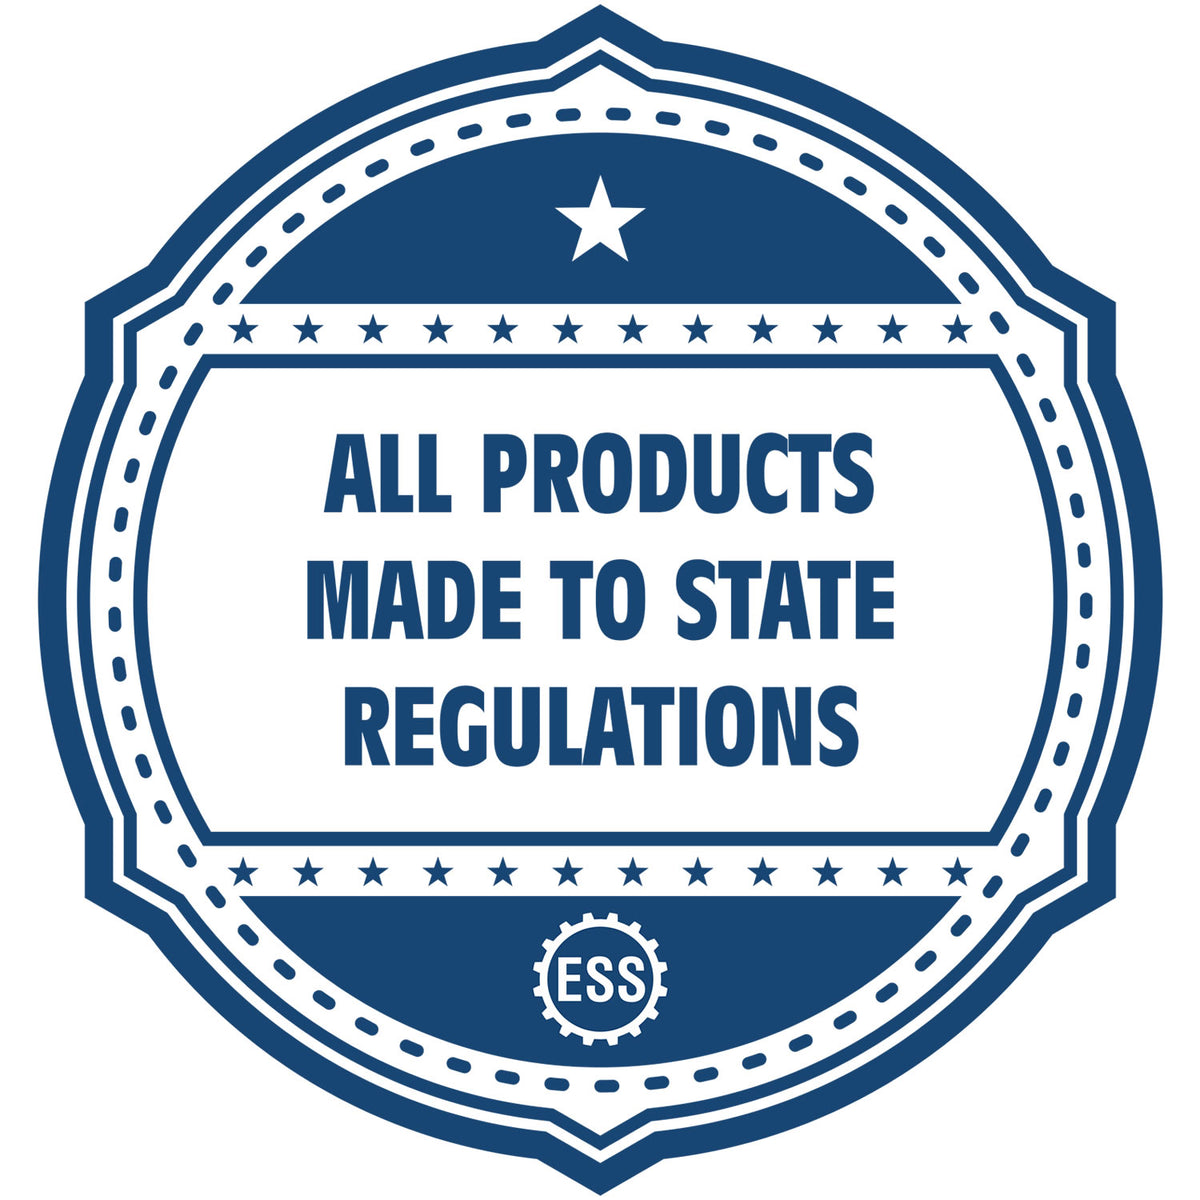 An icon or badge element for the Premium MaxLight Pre-Inked New York Engineering Stamp showing that this product is made in compliance with state regulations.